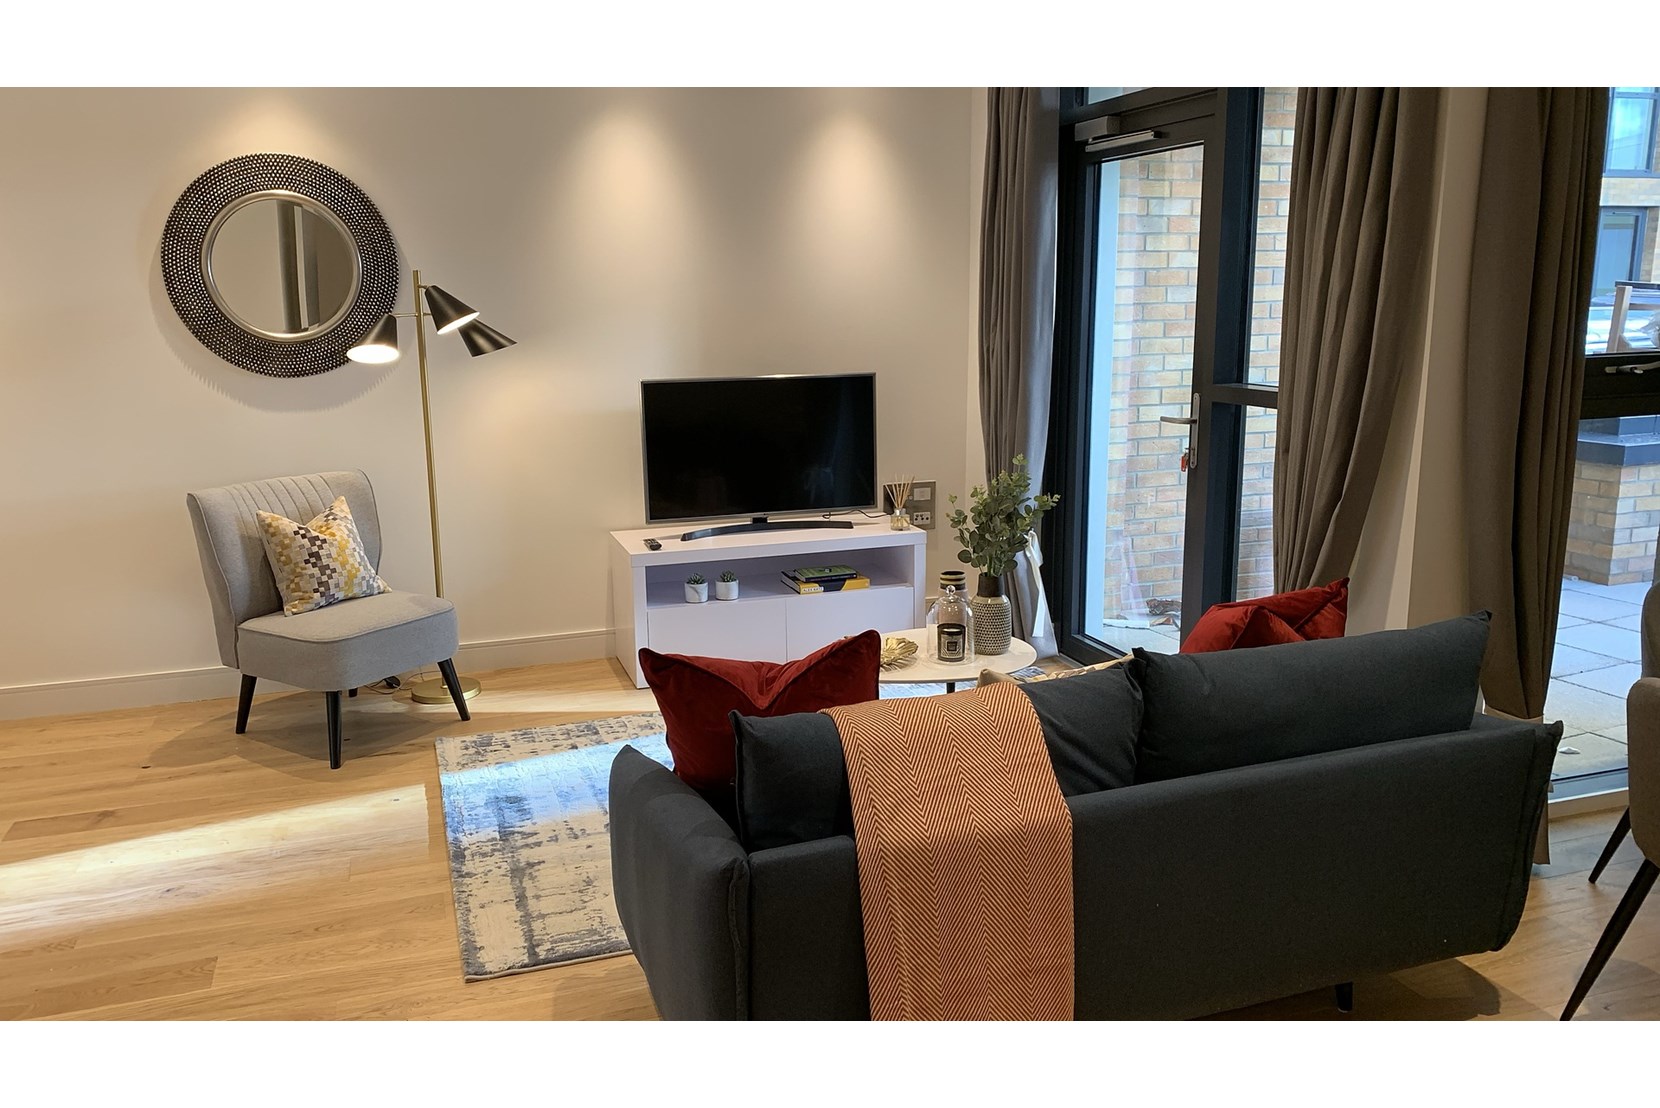 Apartments to Rent by Savills at Wembley Central, Brent, HA1, living area